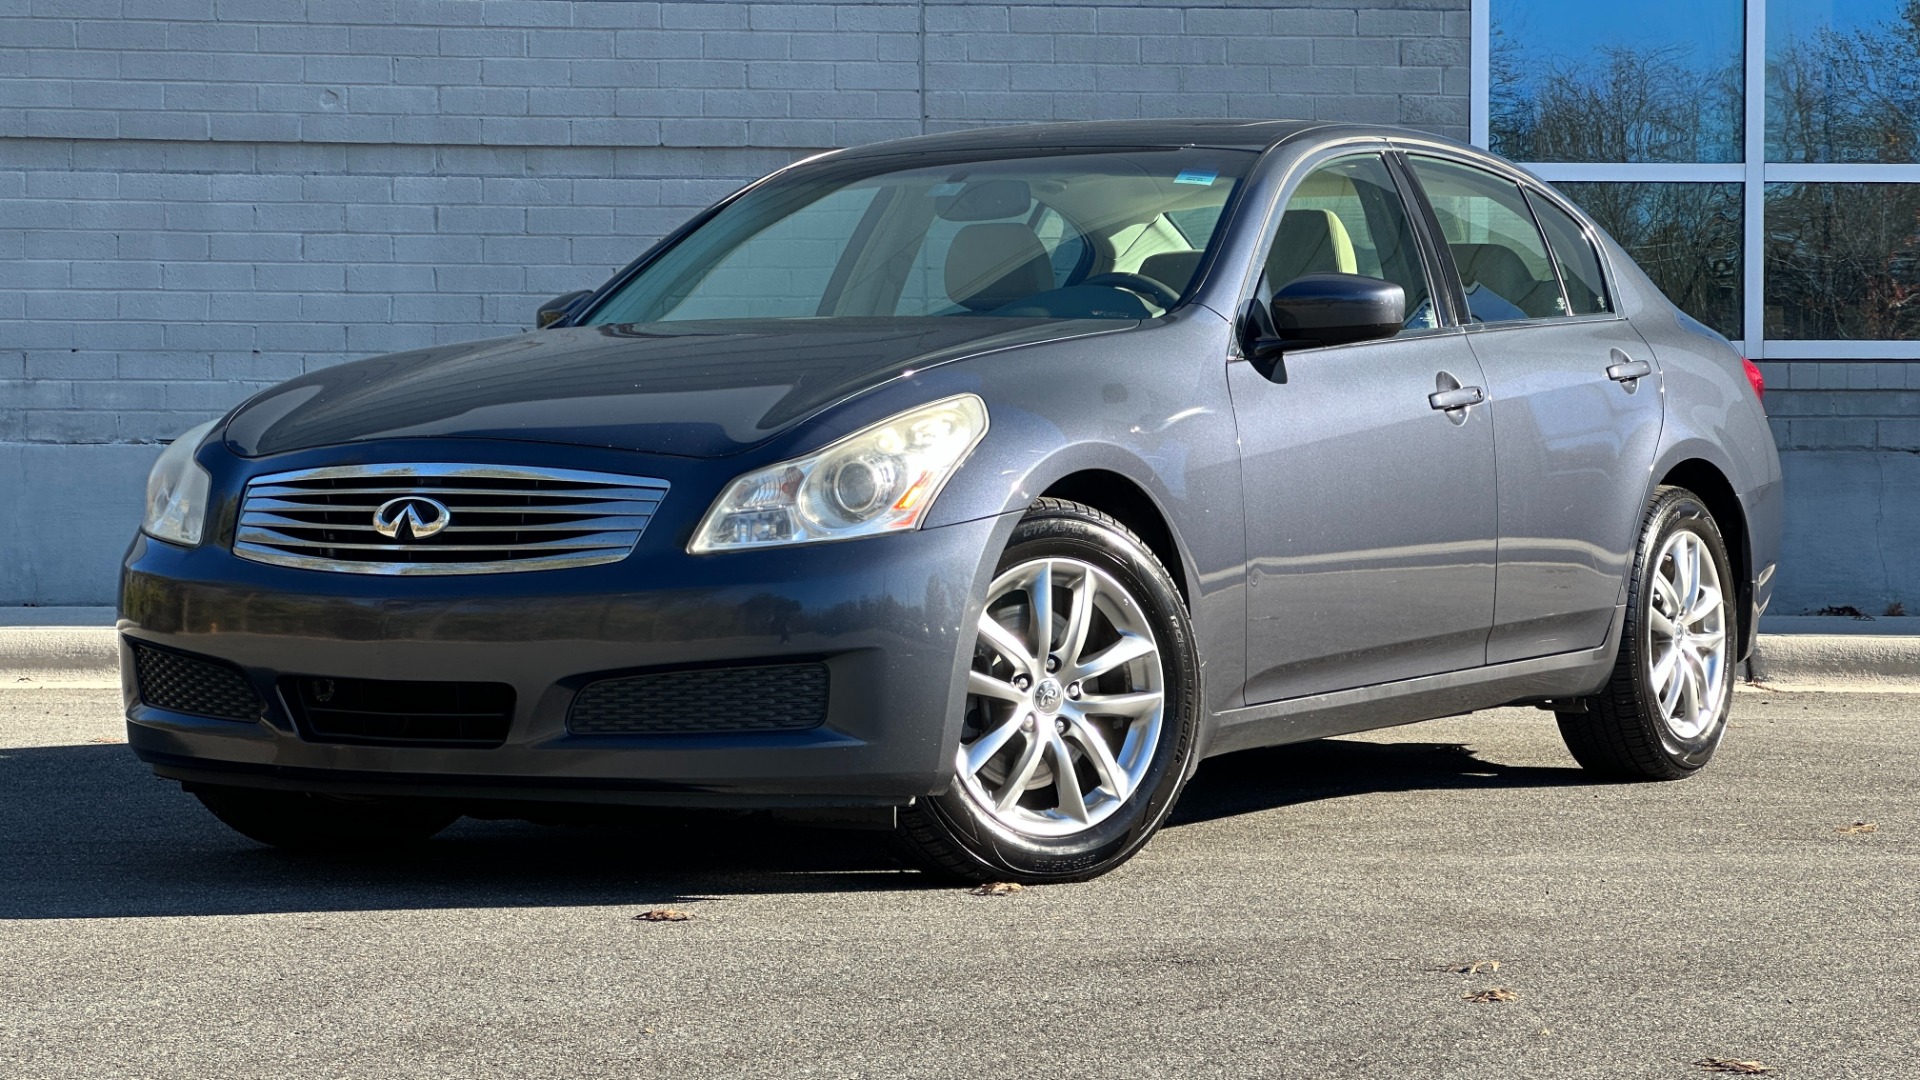 Used 2009 INFINITI G37 Sedan X / AWD / PREMIUM PACKAGE / BOSE / LEATHER / 3.7L V6 / WOOD TRIM for sale $6,798 at Formula Imports in Charlotte NC 28227 1